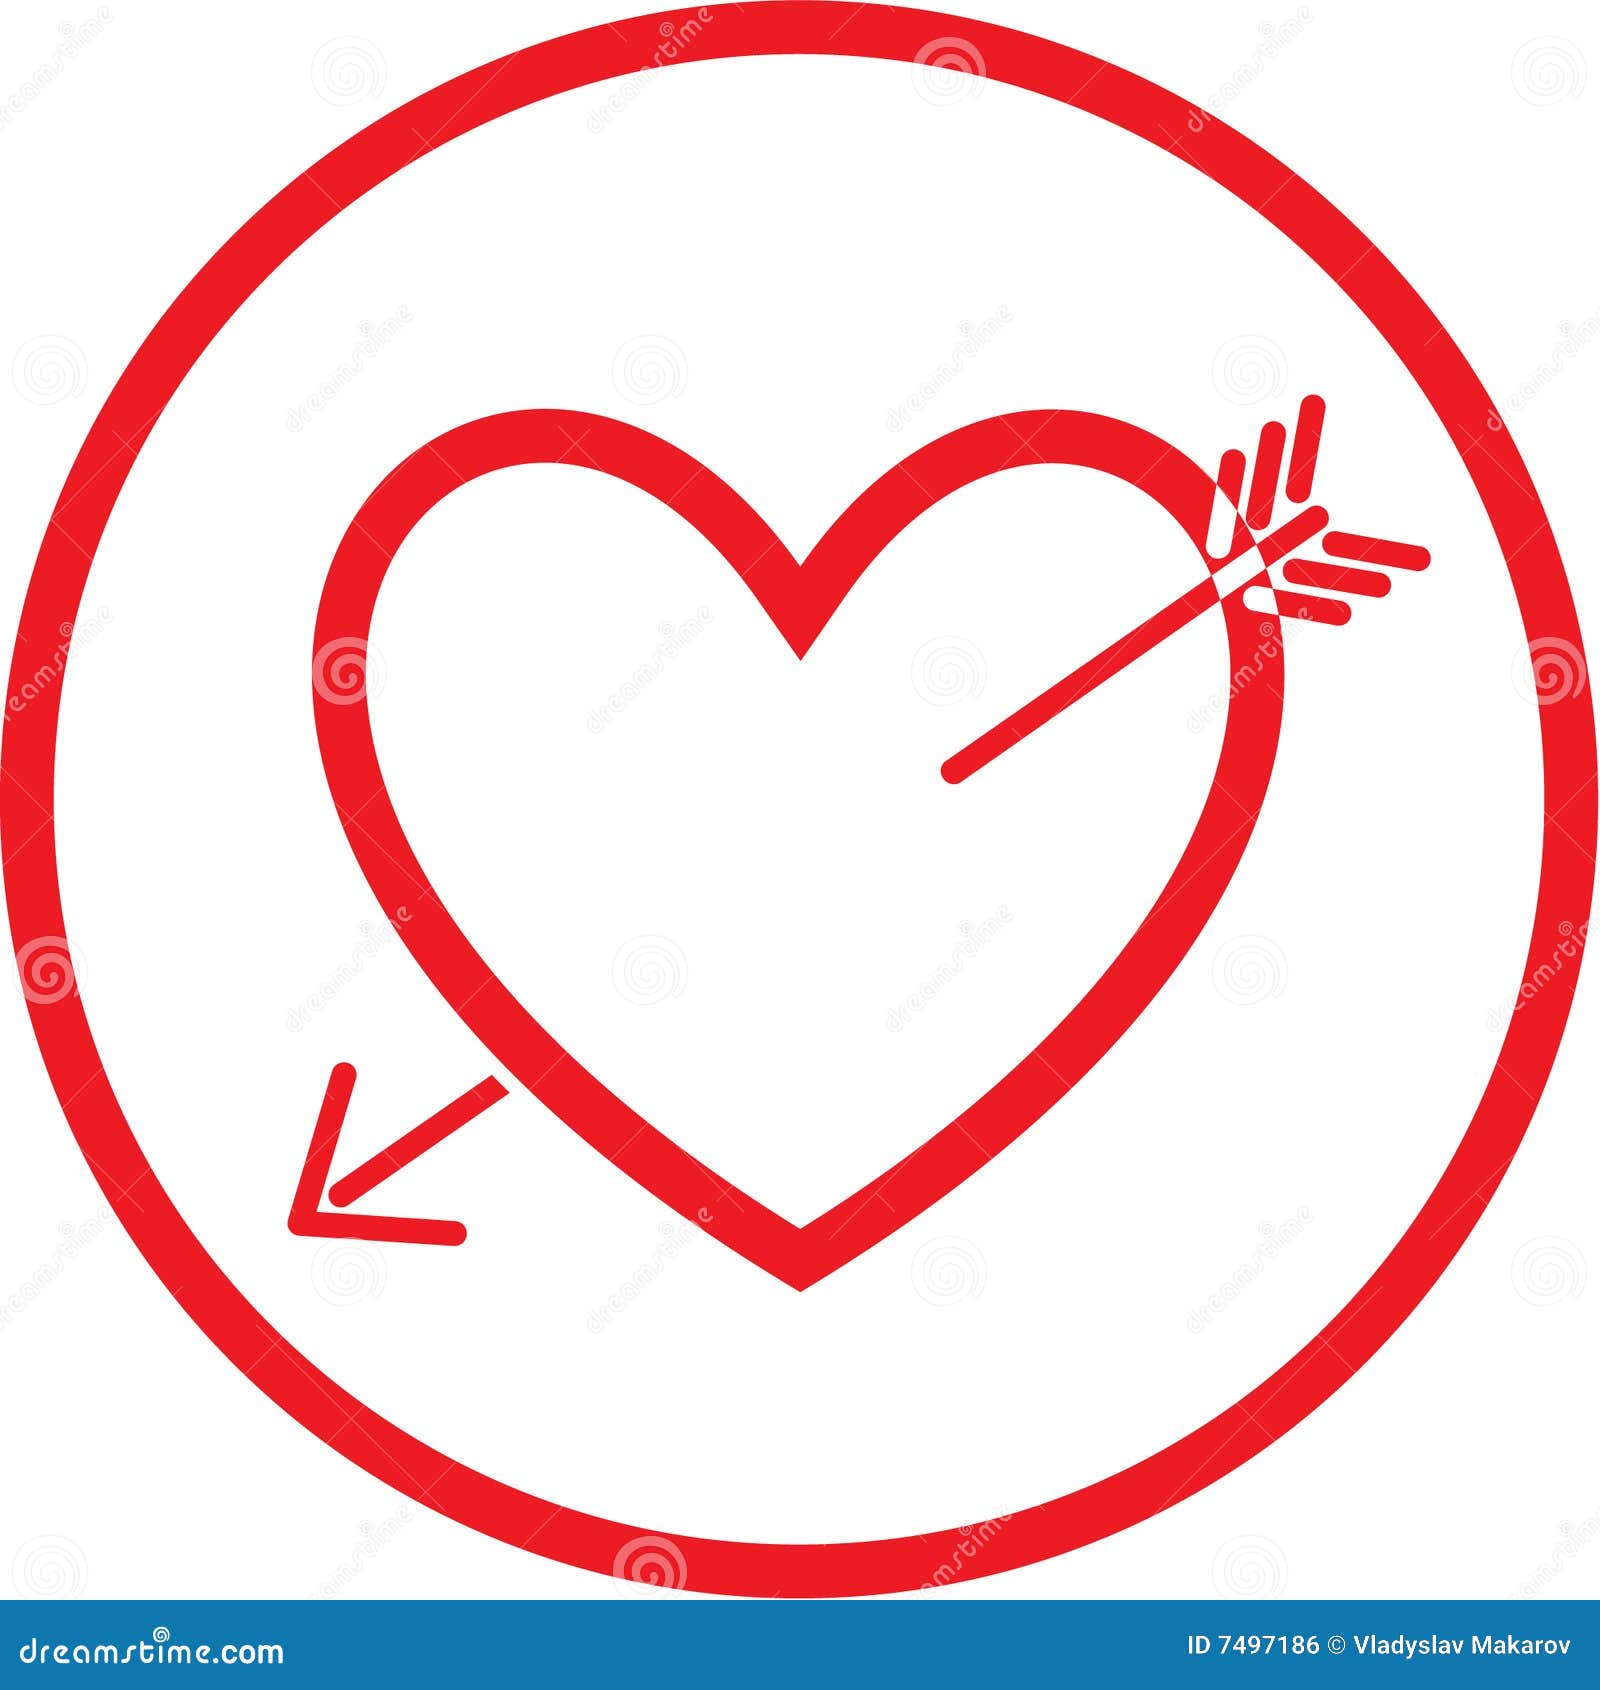 Vector Heart And Arrow Icon Royalty Free Stock Image - Image: 7497186